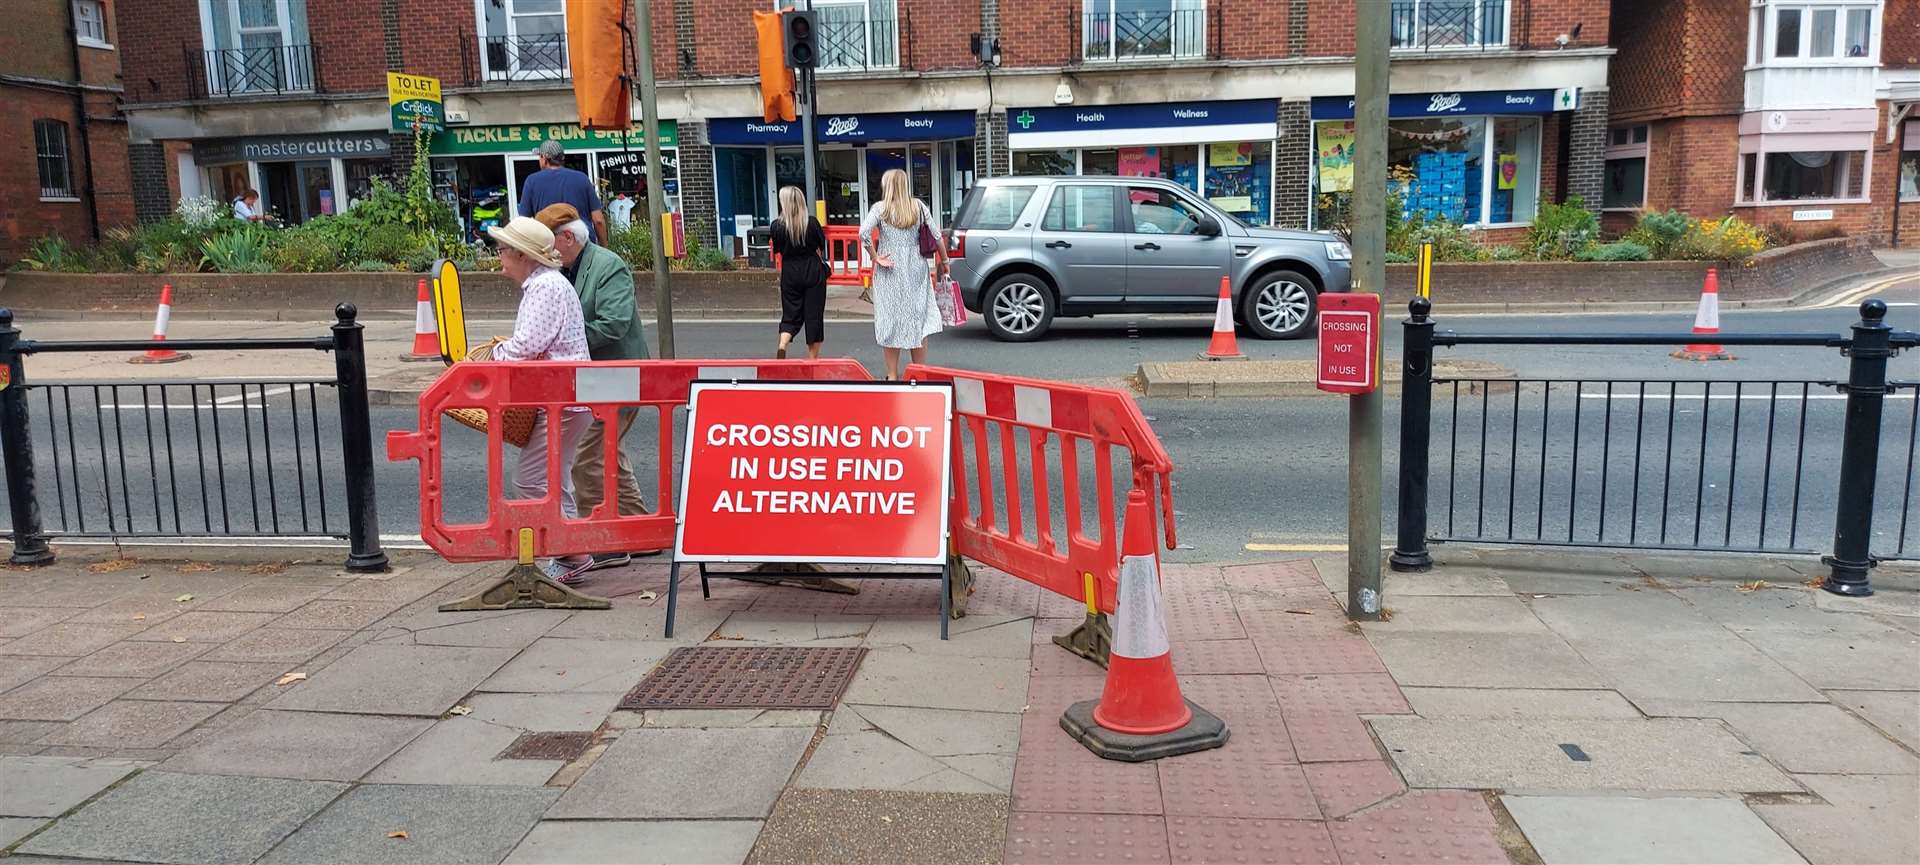 People have been using the crossing despite the closure. Photo: Neil Murray